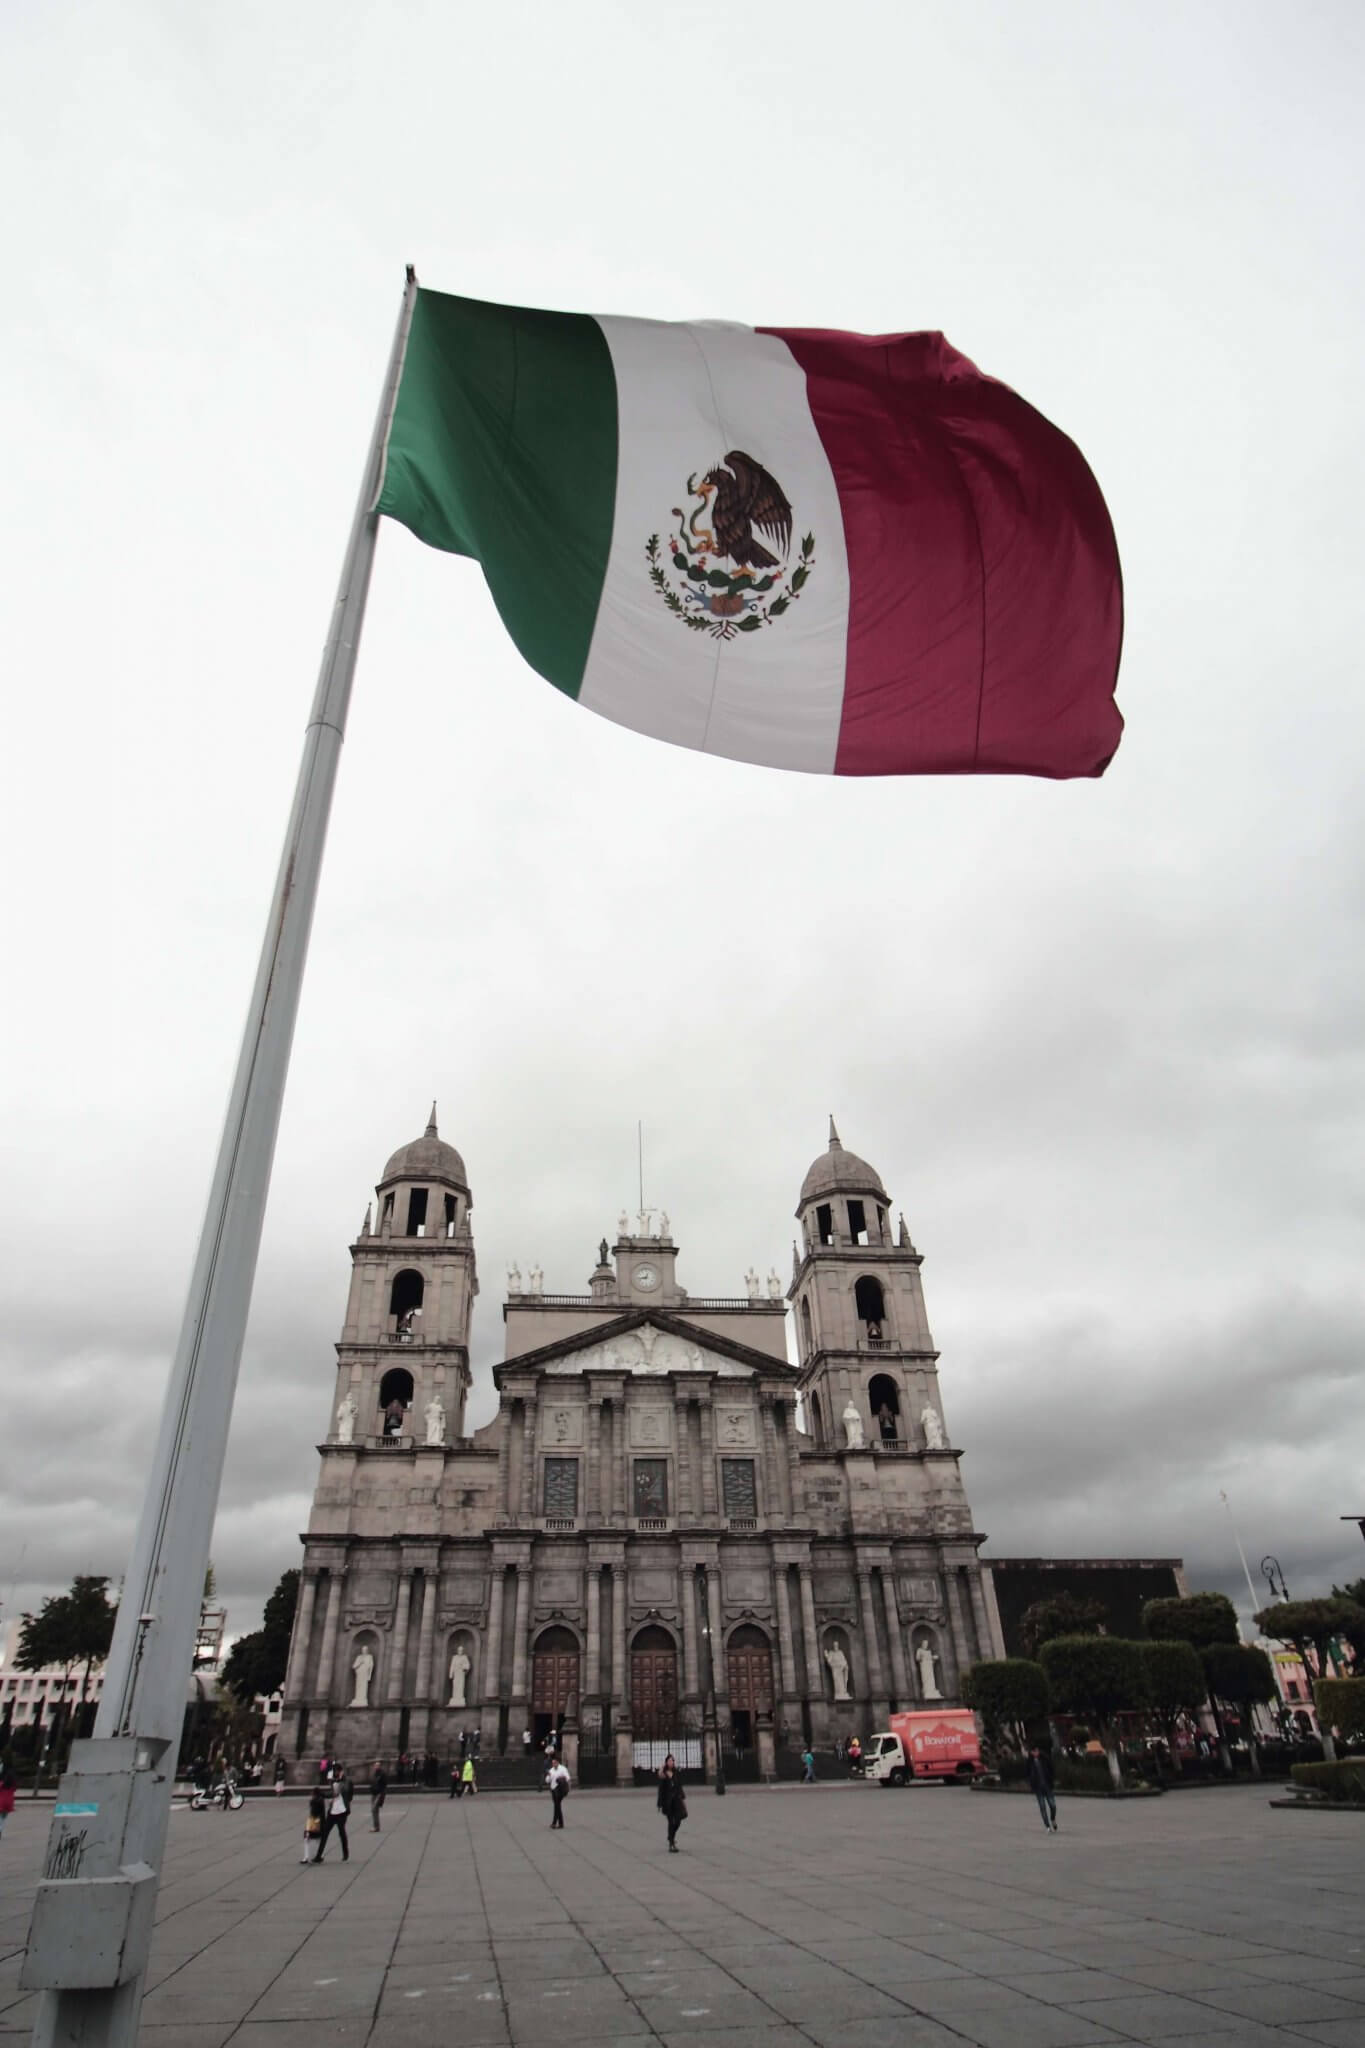 Corruption in the Mexican government raising eyebrows and questions.